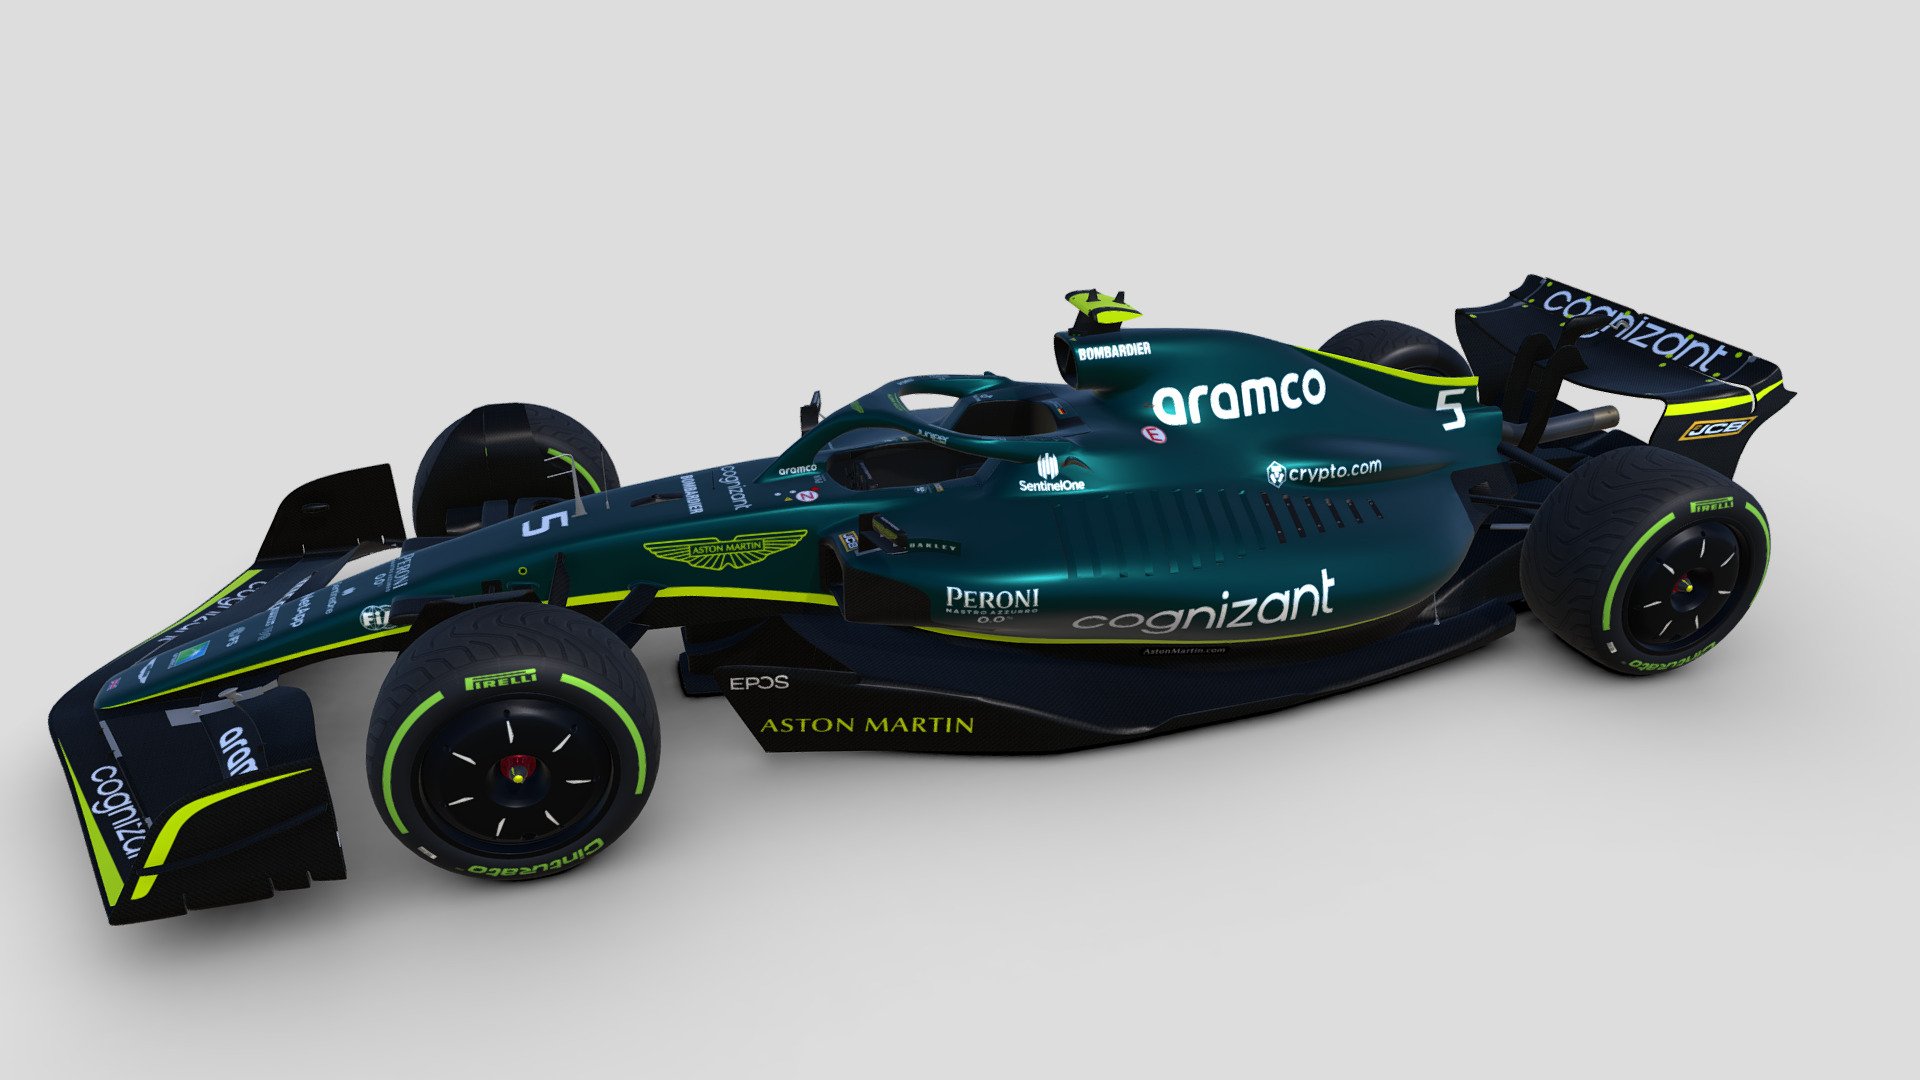 F1 2022 Aston Martin AMR22 - Imola GP version
Low poly model for Grand Prix 4
Sebastian Vettel
Updates: Halo winglets and mirrors supports back, as seens as Bahrain GP. Reinforcement rods between hull and rear chassis have moved a little bit forward 3d model